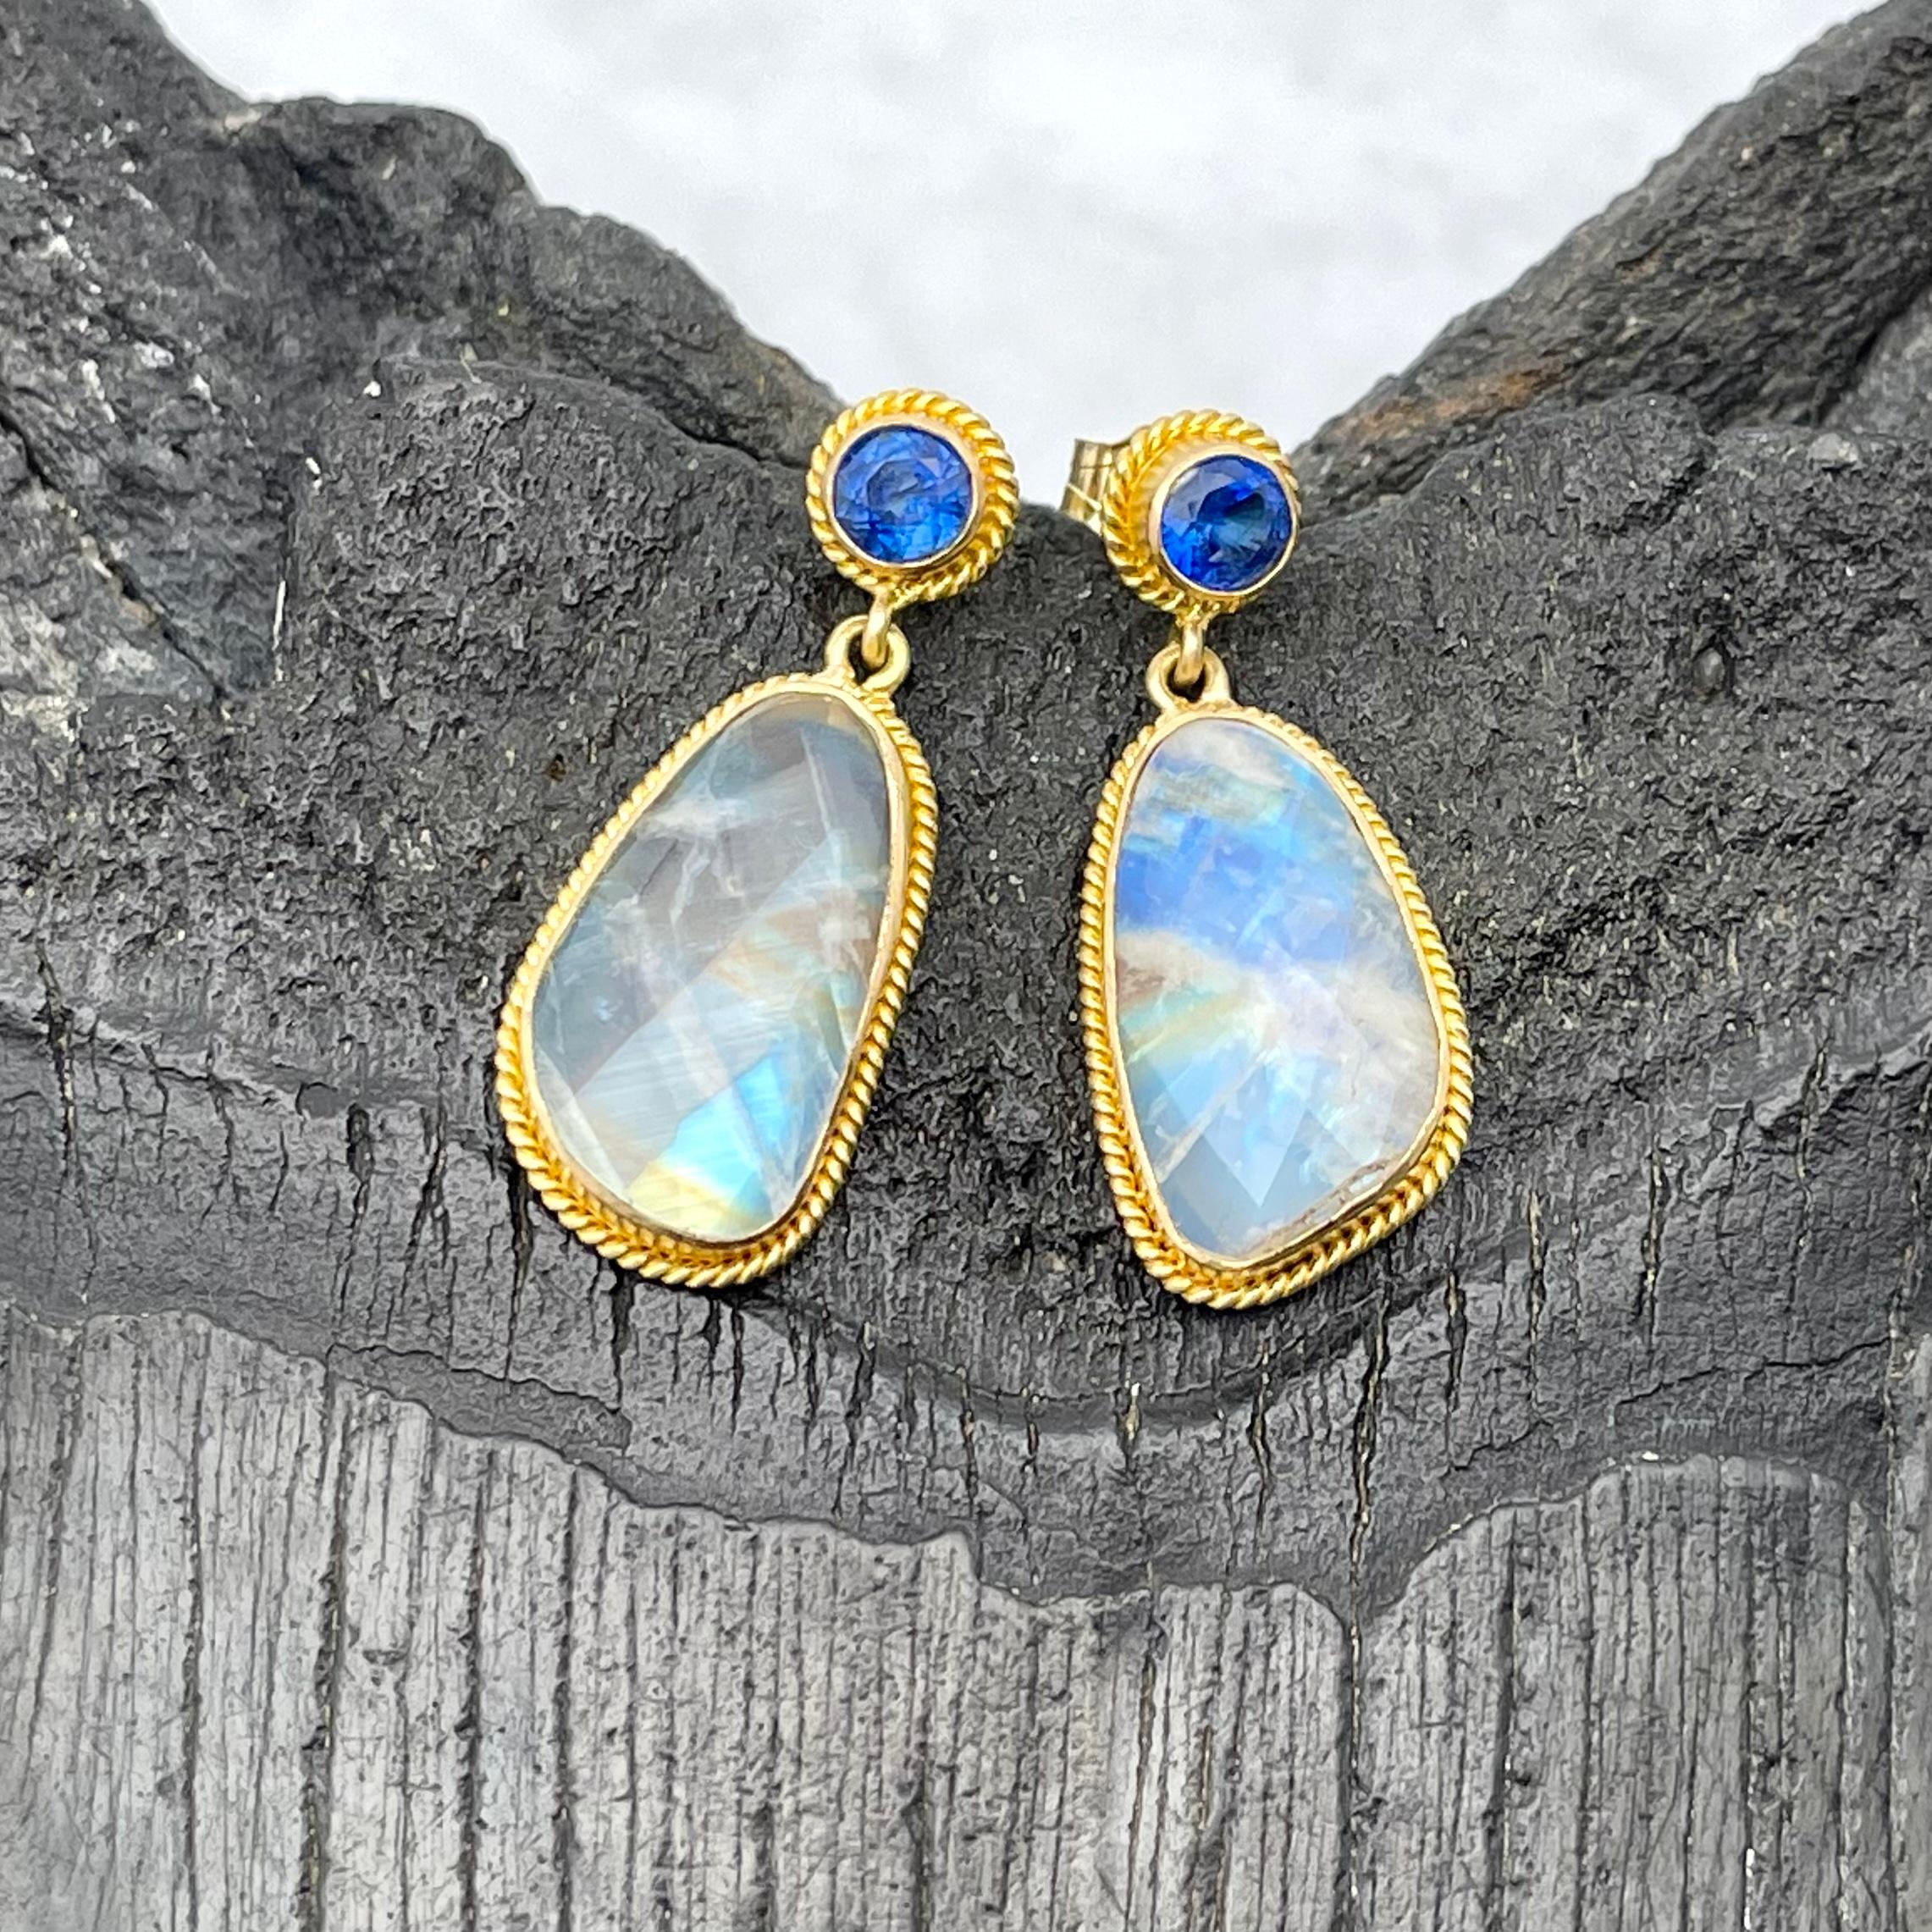 Two 8 x 15 mm irregular shaped rainbow moonstone rose cuts are suspended below intense blue 4 mm faceted Kyanite posts, all surrounded by 18 K gold twist wire accents in this attractive handmade Steven Battelle design. The hues of blue and gold